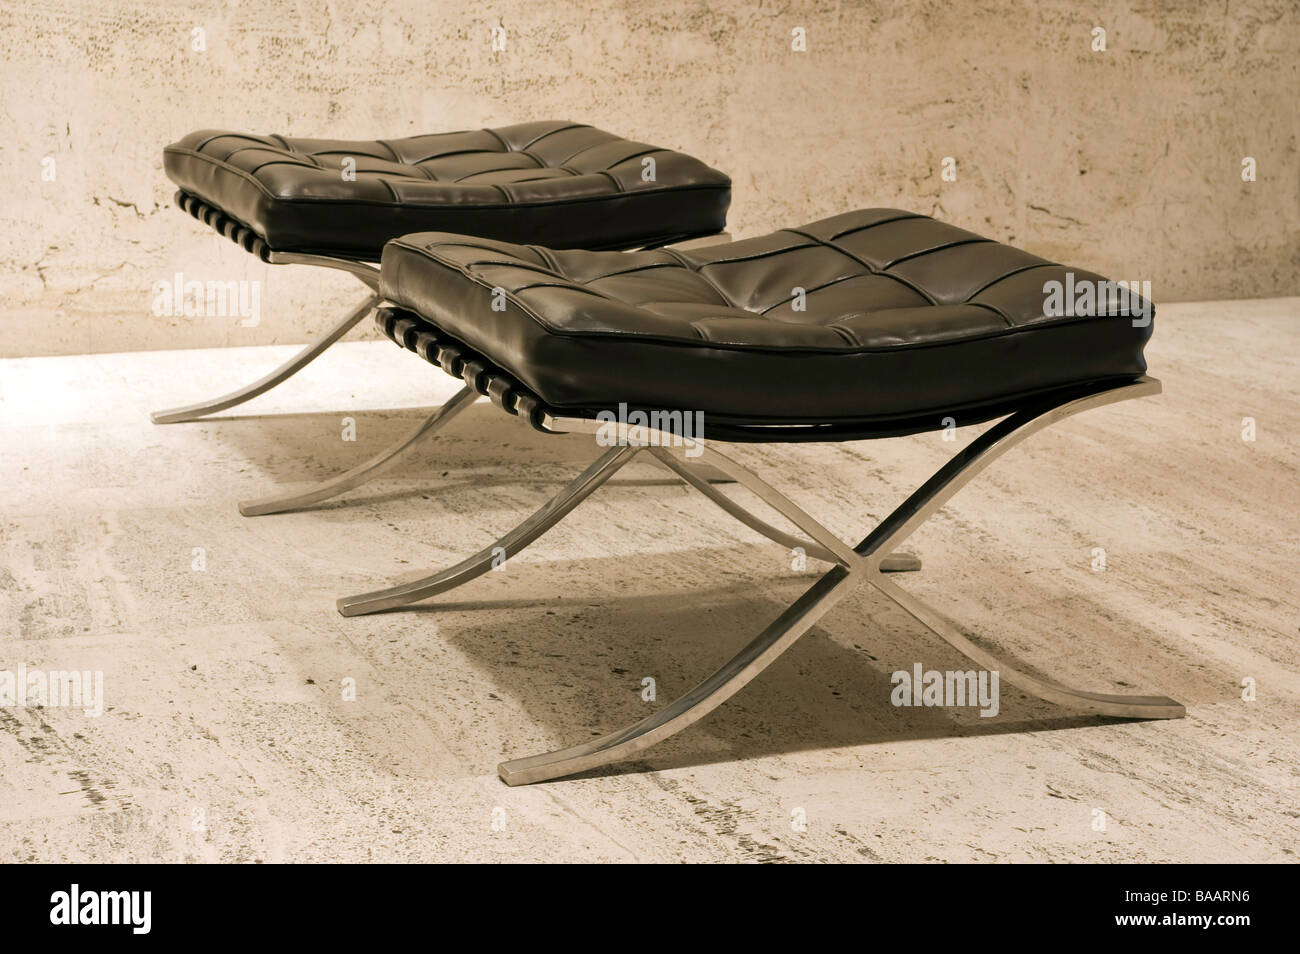 Two Barcelona Ottomans, designed by Ludwig Mies Van Der Rohe and Lilly  Reich (For Editorial Use Only Stock Photo - Alamy